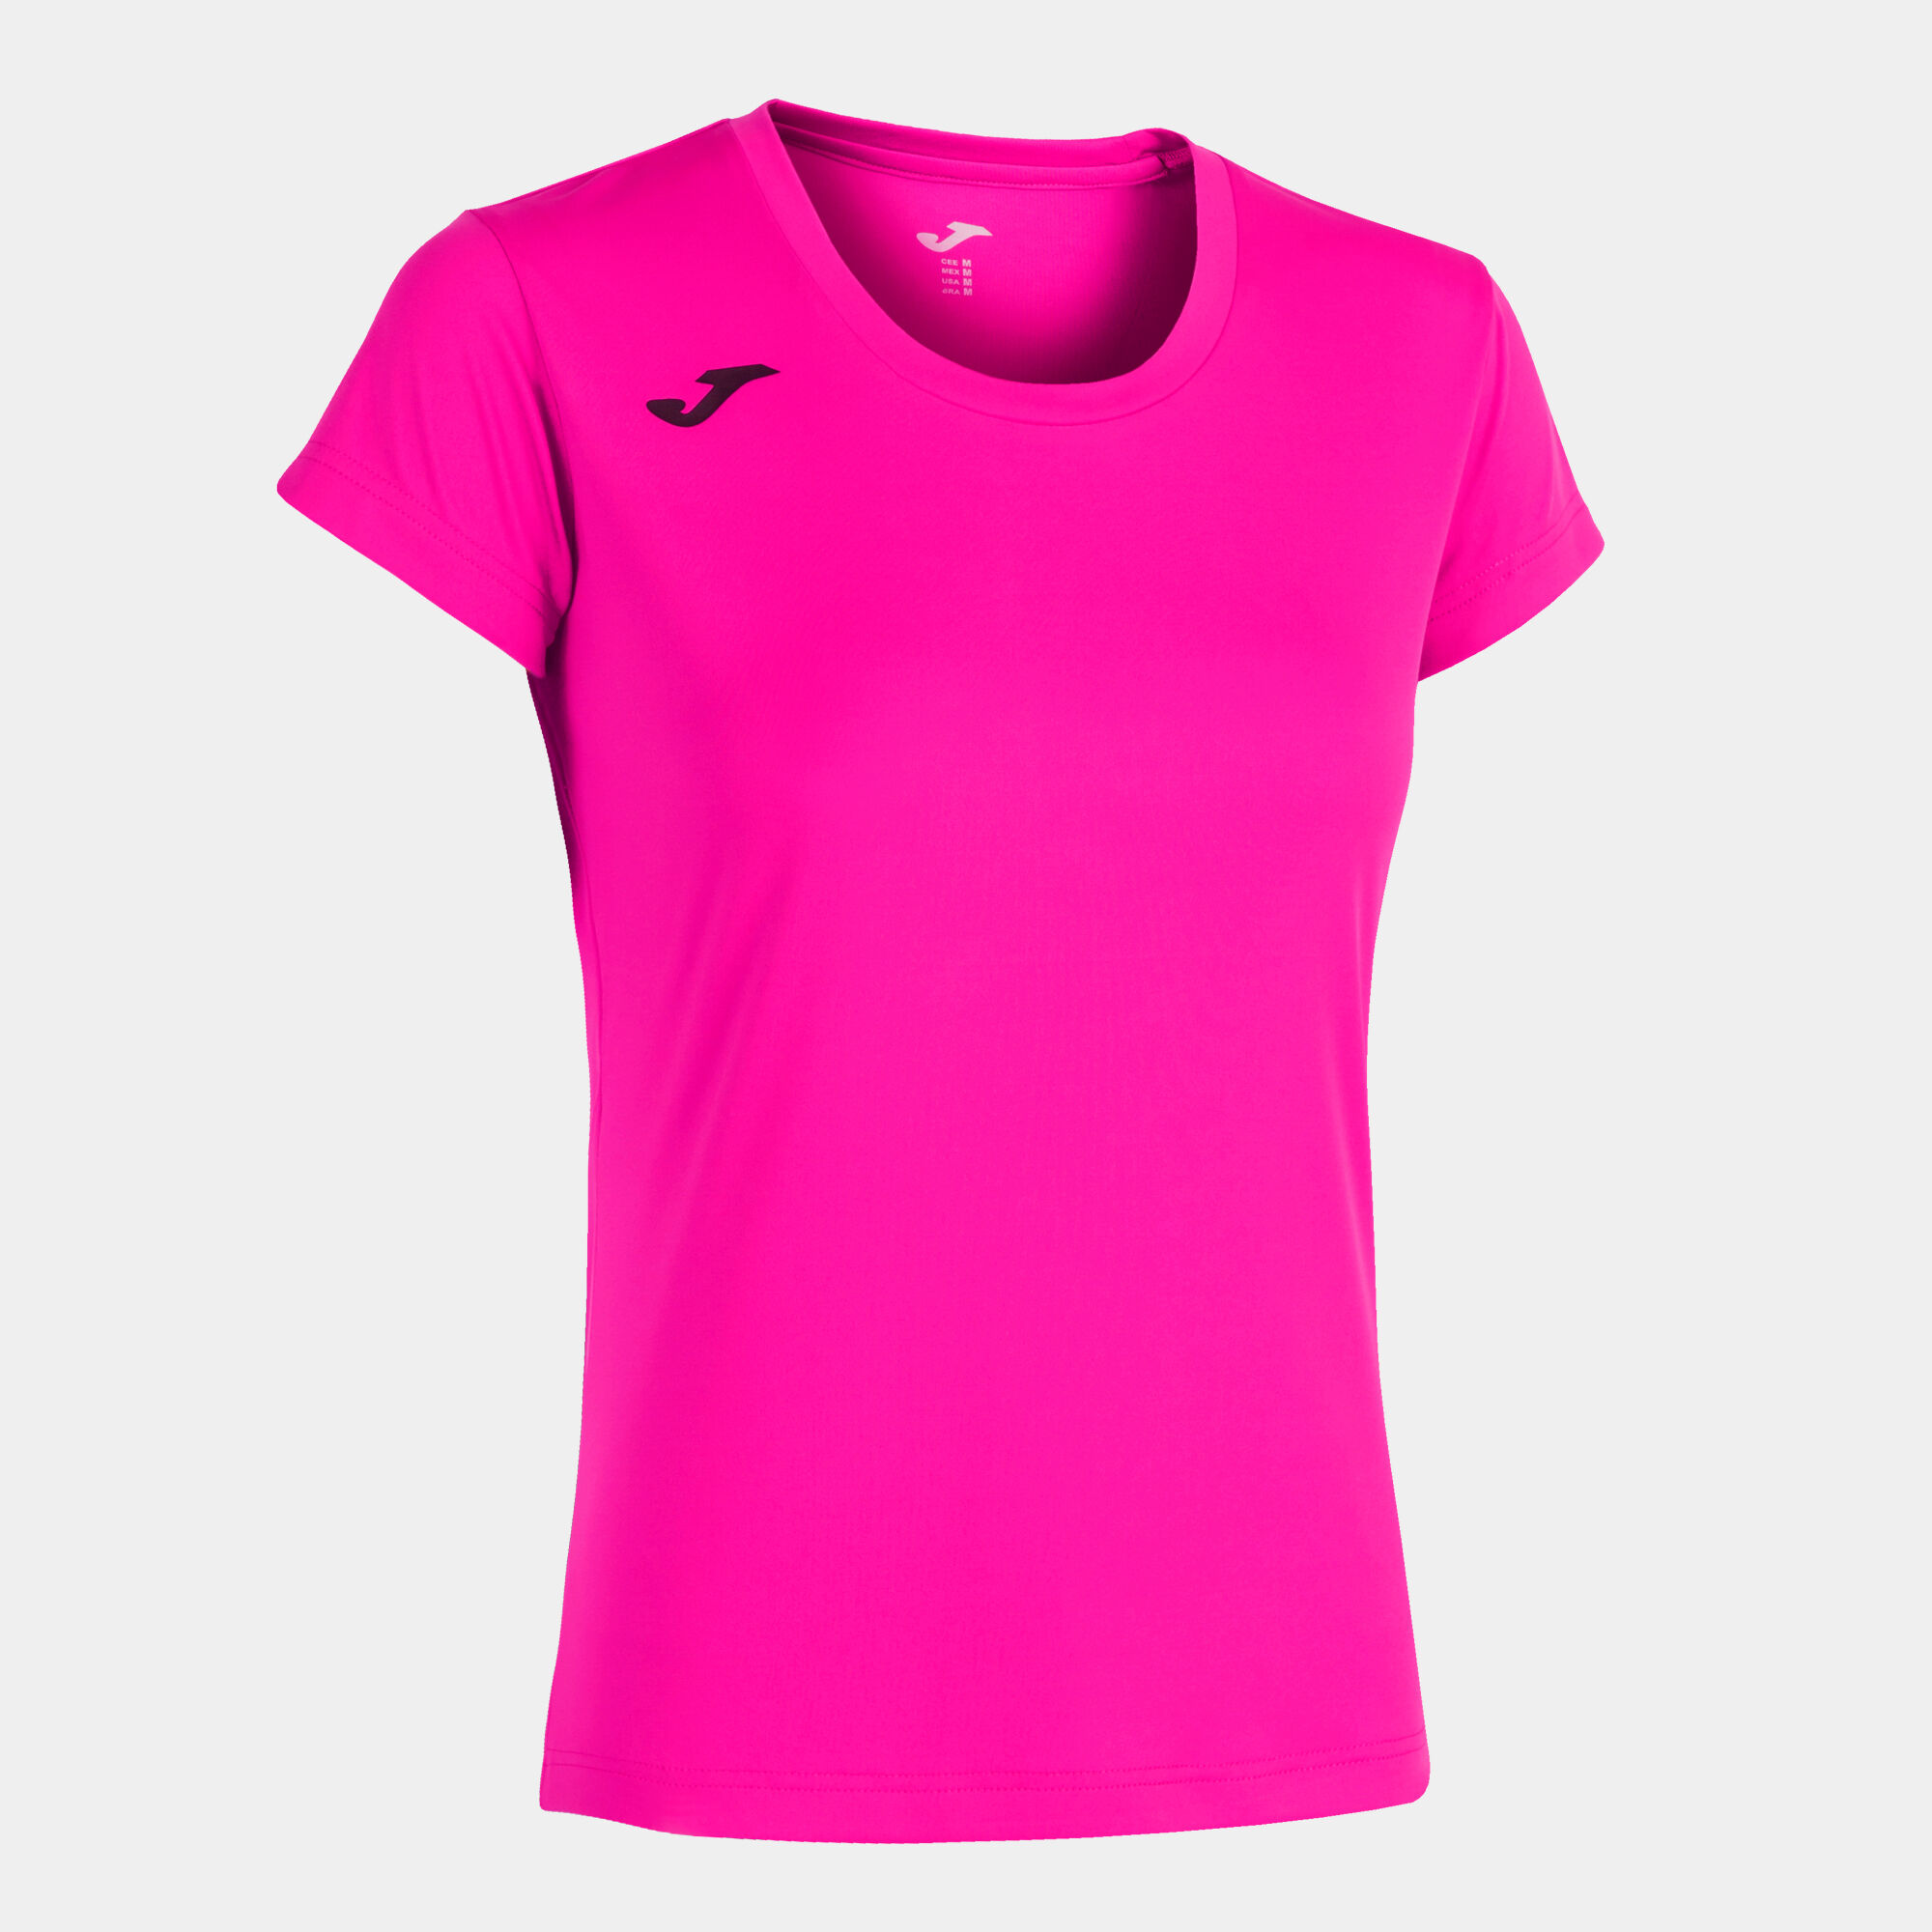 MAILLOT MANCHES COURTES FEMME RECORD II ROSE FLUO